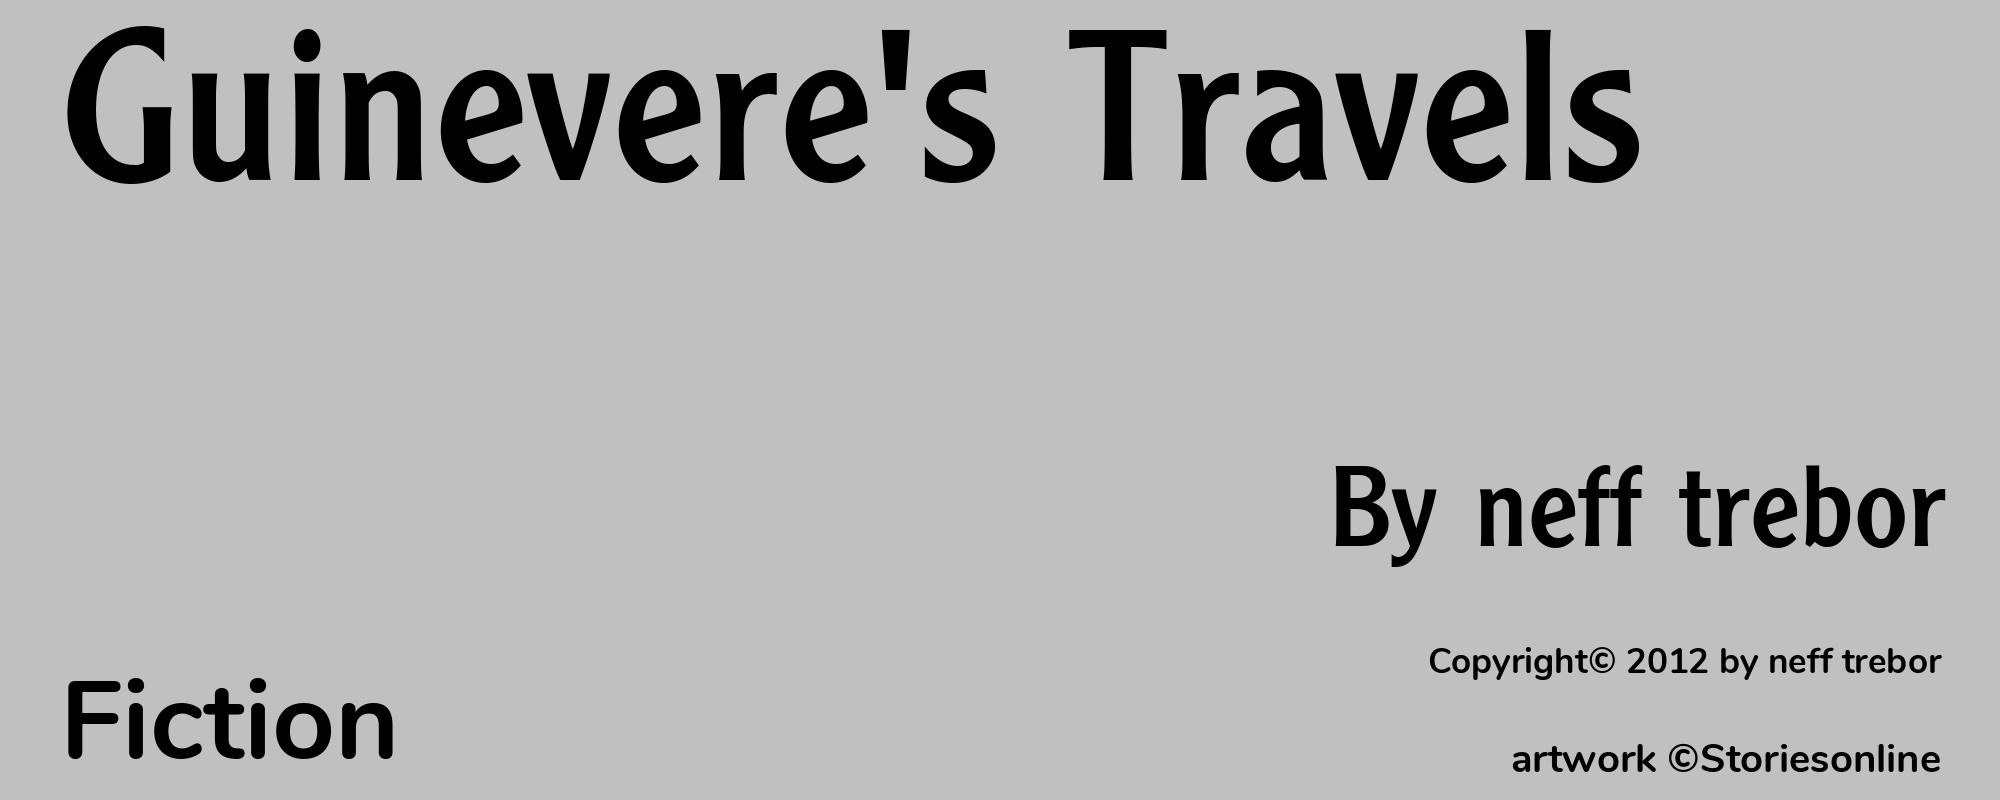 Guinevere's Travels - Cover